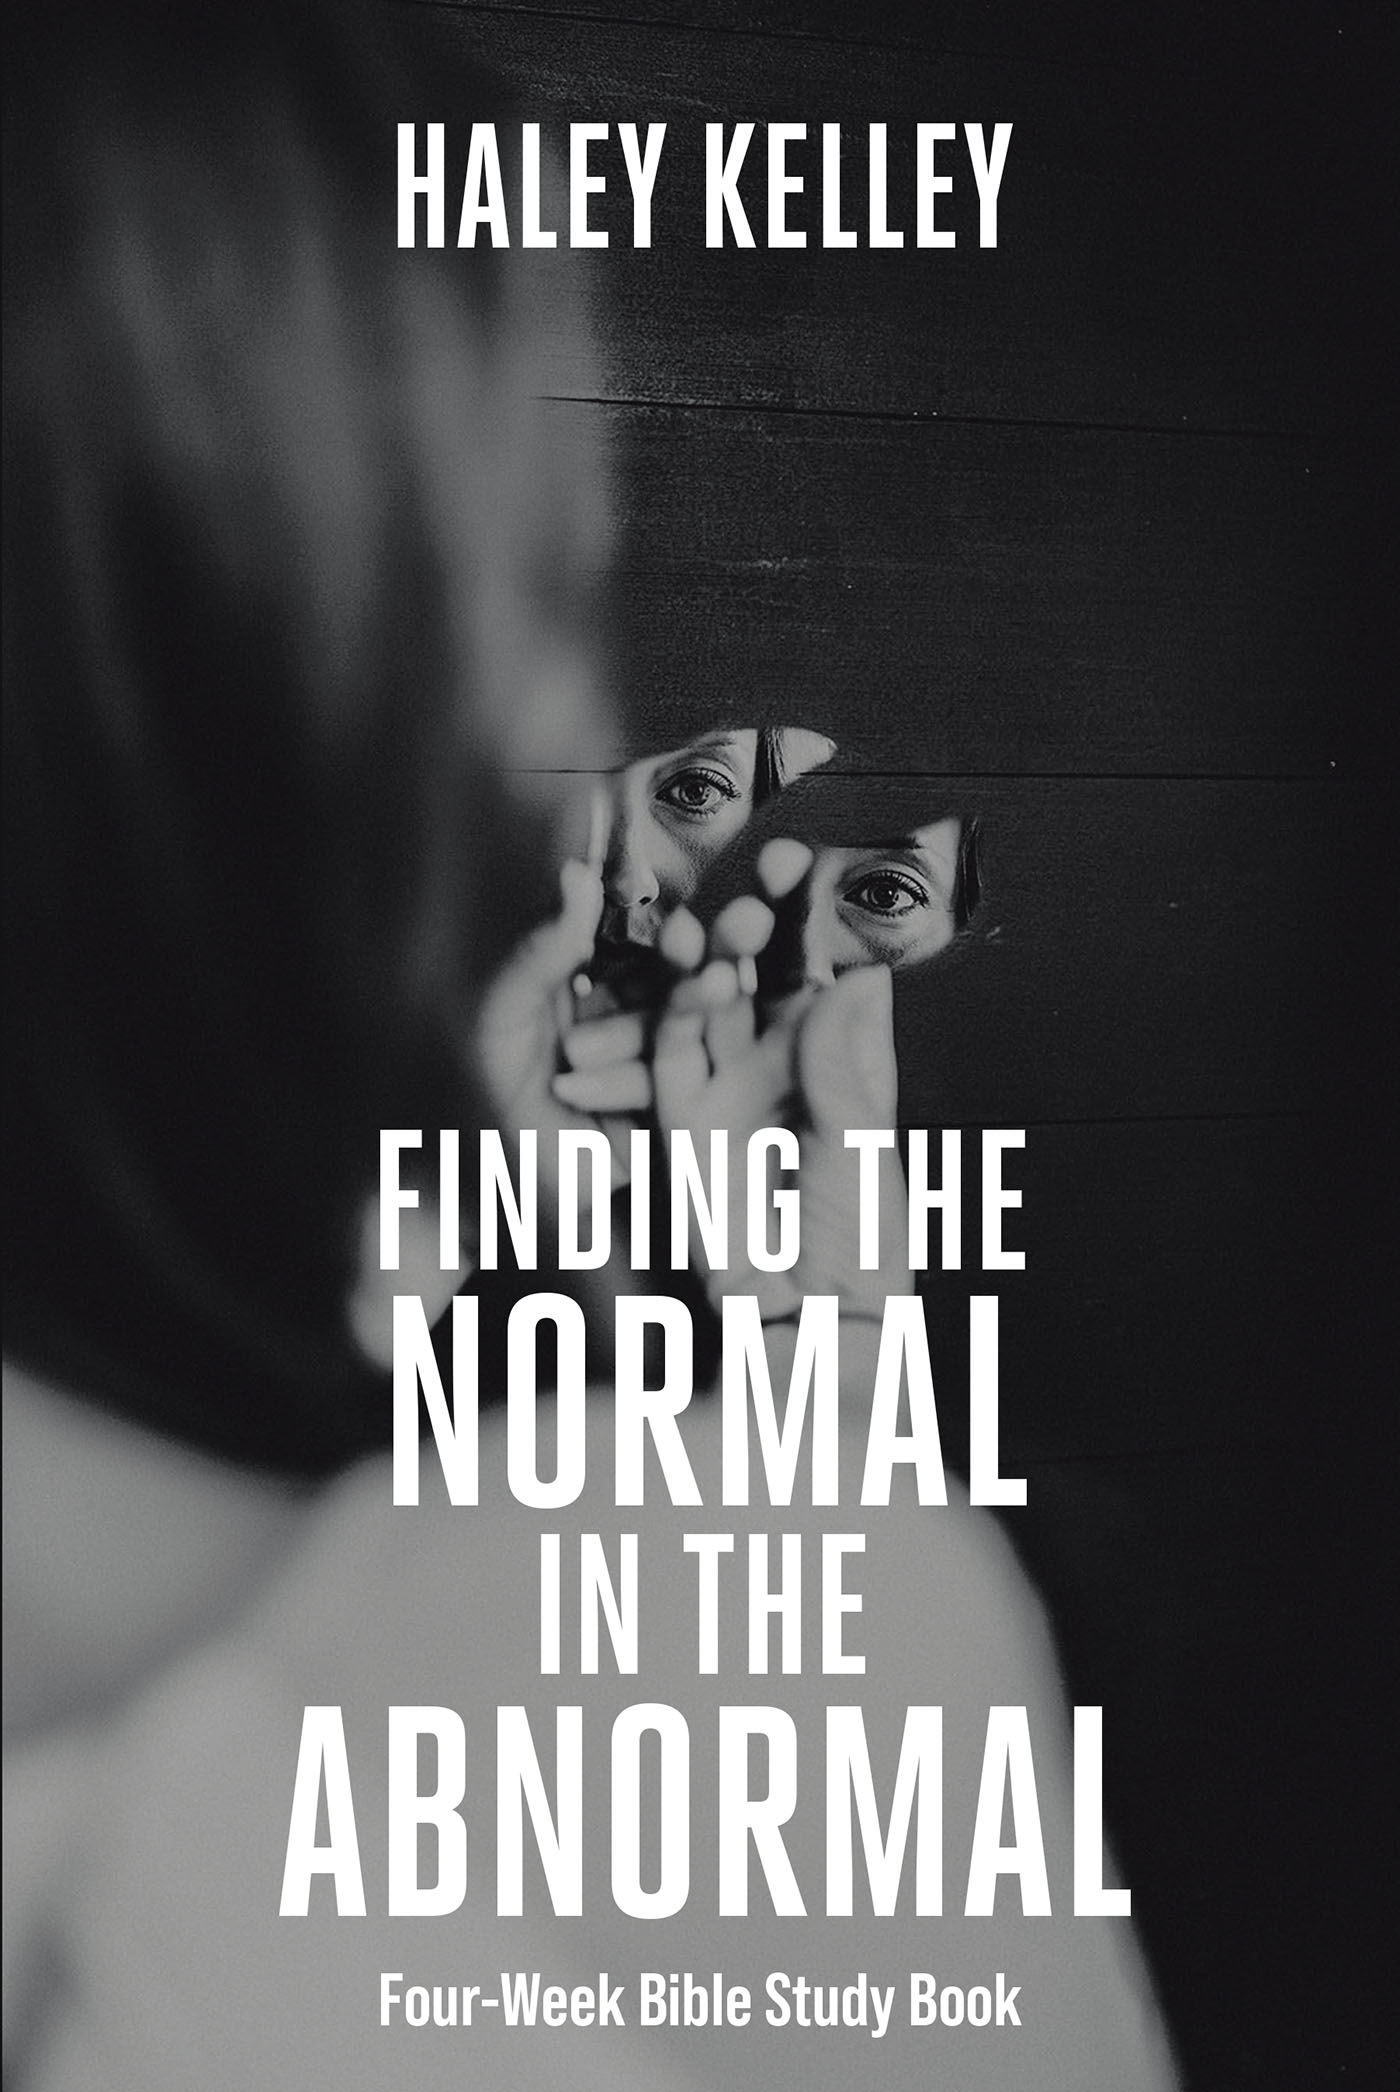 Haley Kelley’s Newly Released “Finding the Normal in the Abnormal: Four-Week Bible Study Book” is an Encouraging Opportunity to Reset One’s Spiritual Path